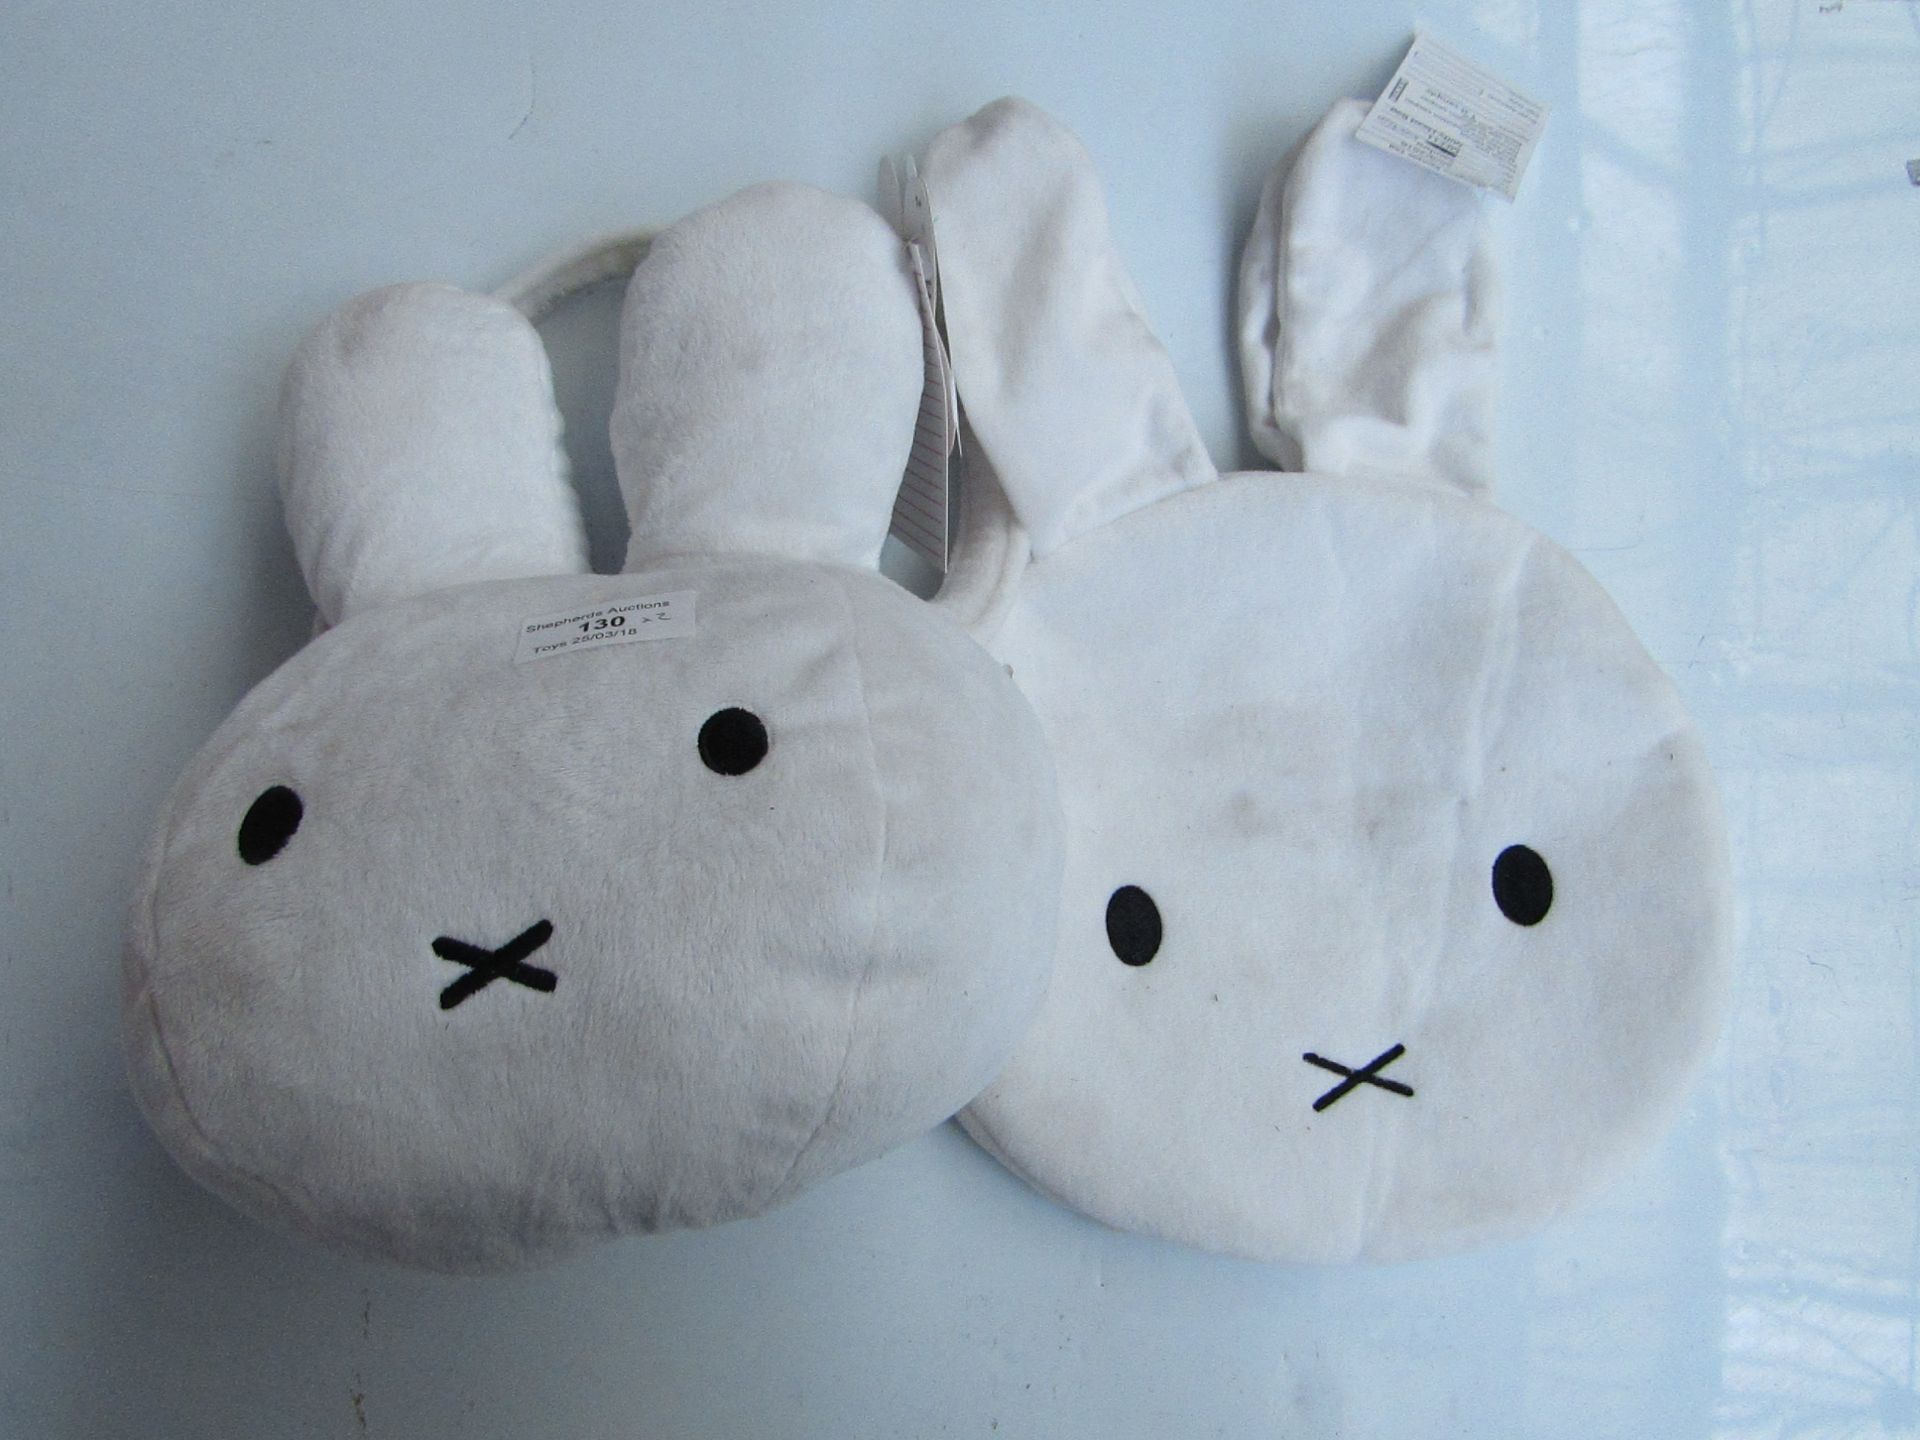 2x Rabbit plush toys with zip up storage sections, new.